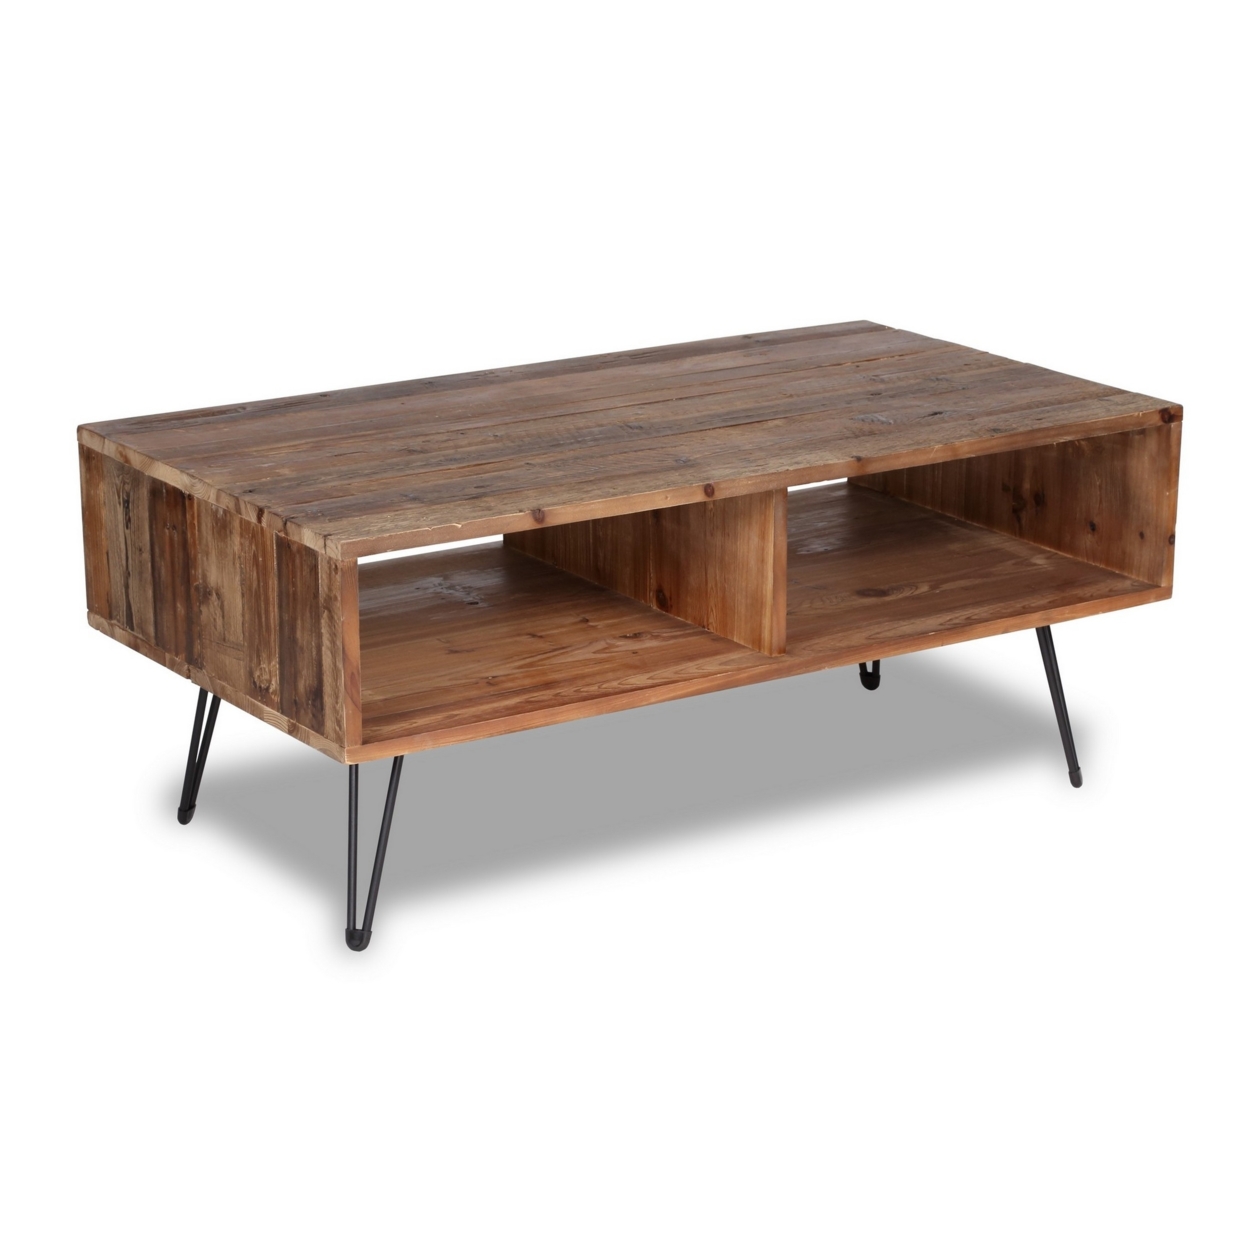 42 Inch Modern Cocktail Coffee Table With Open Compartments, Brown Wood Top - Saltoro Sherpi